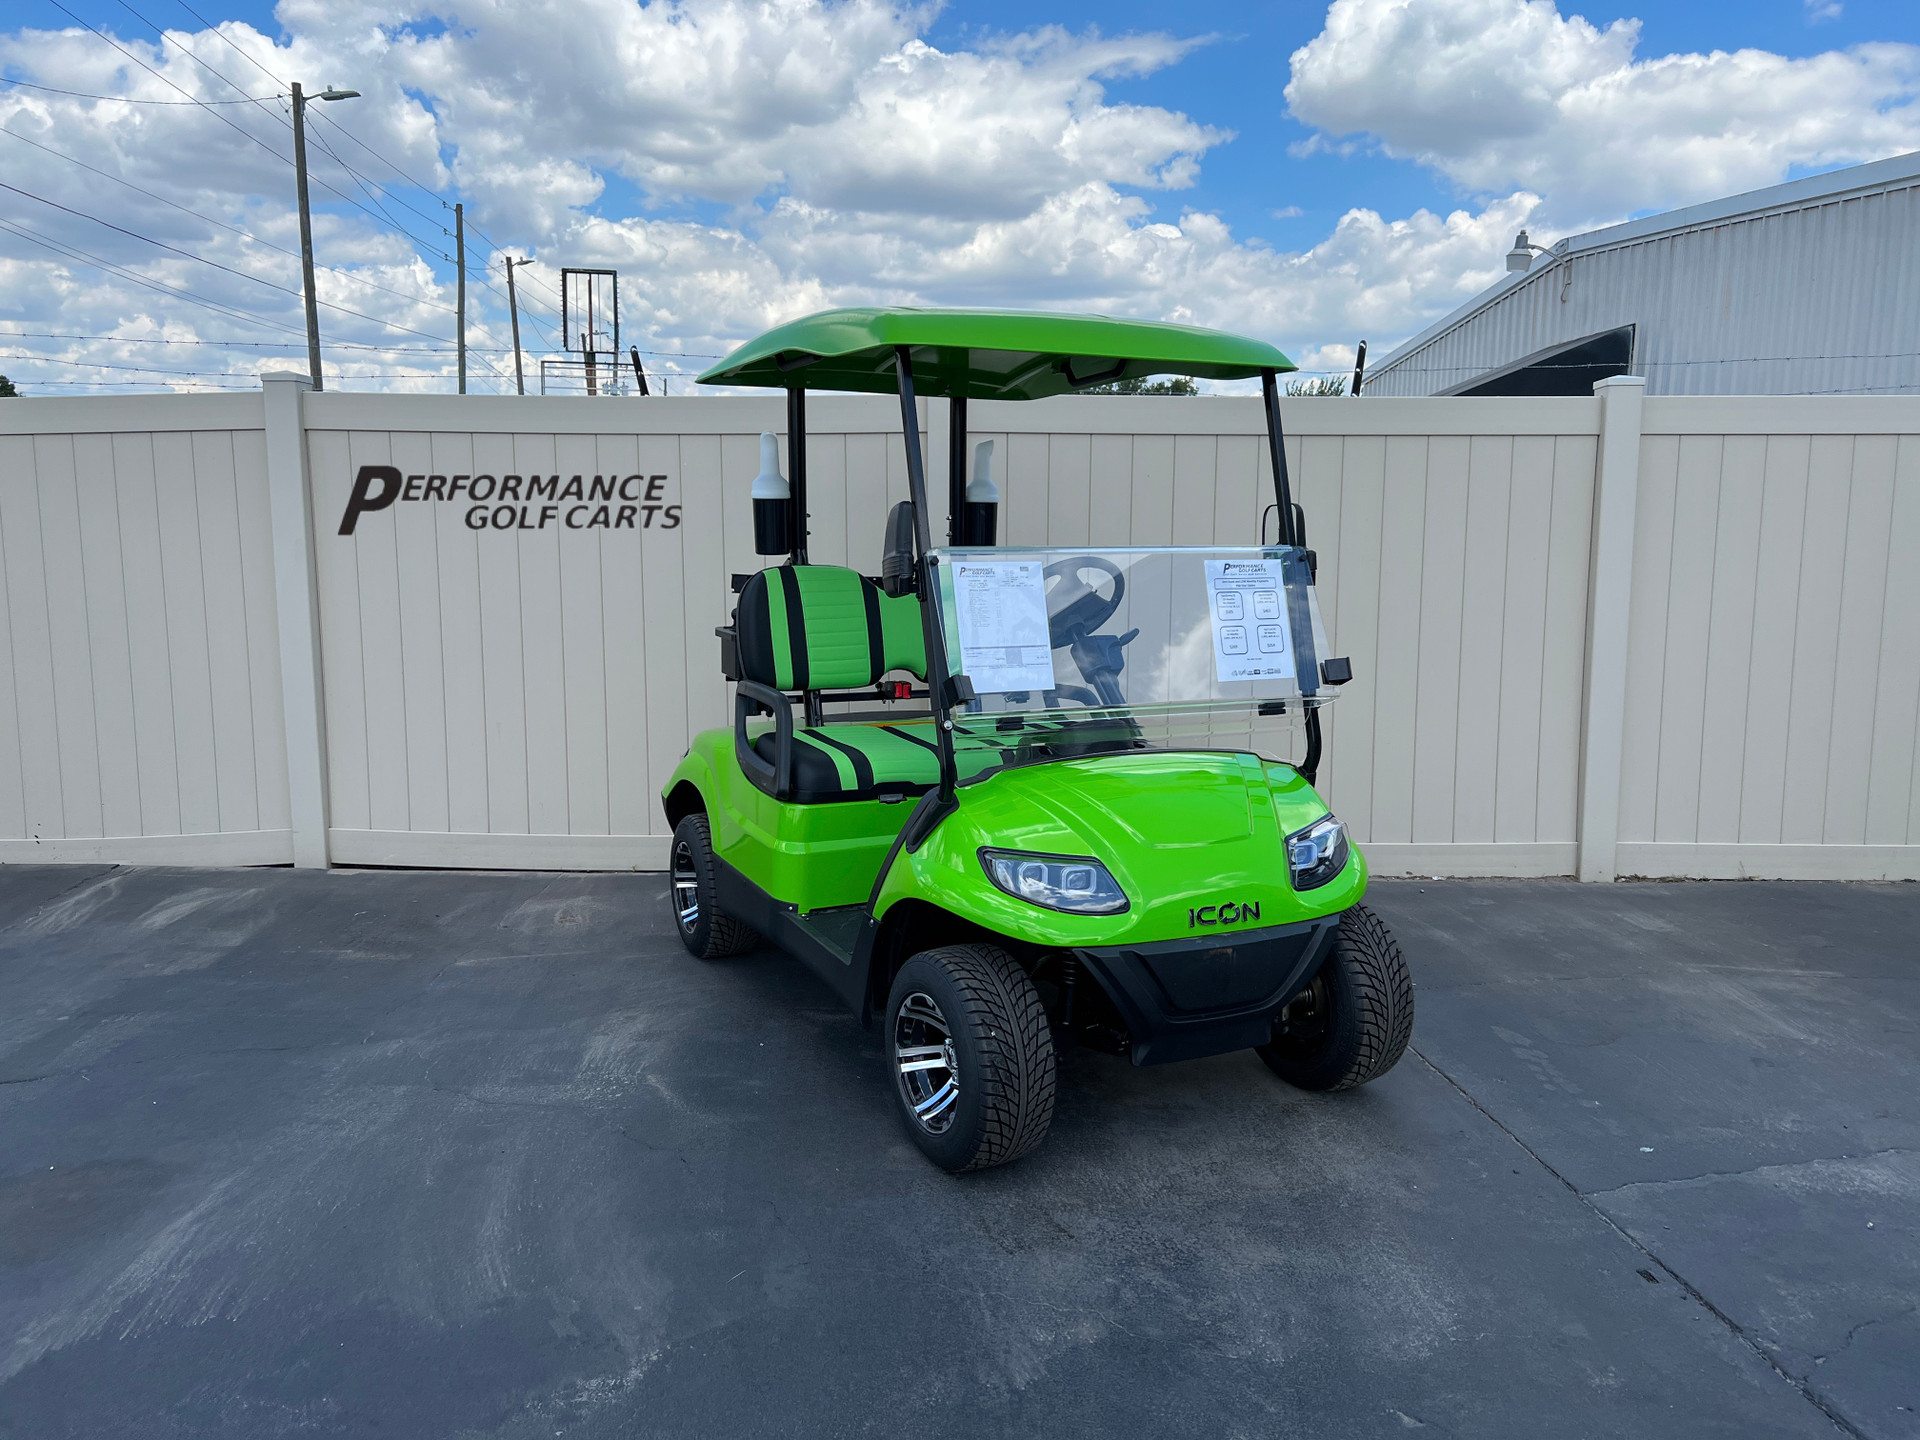 ICON Products Performance Golf Carts